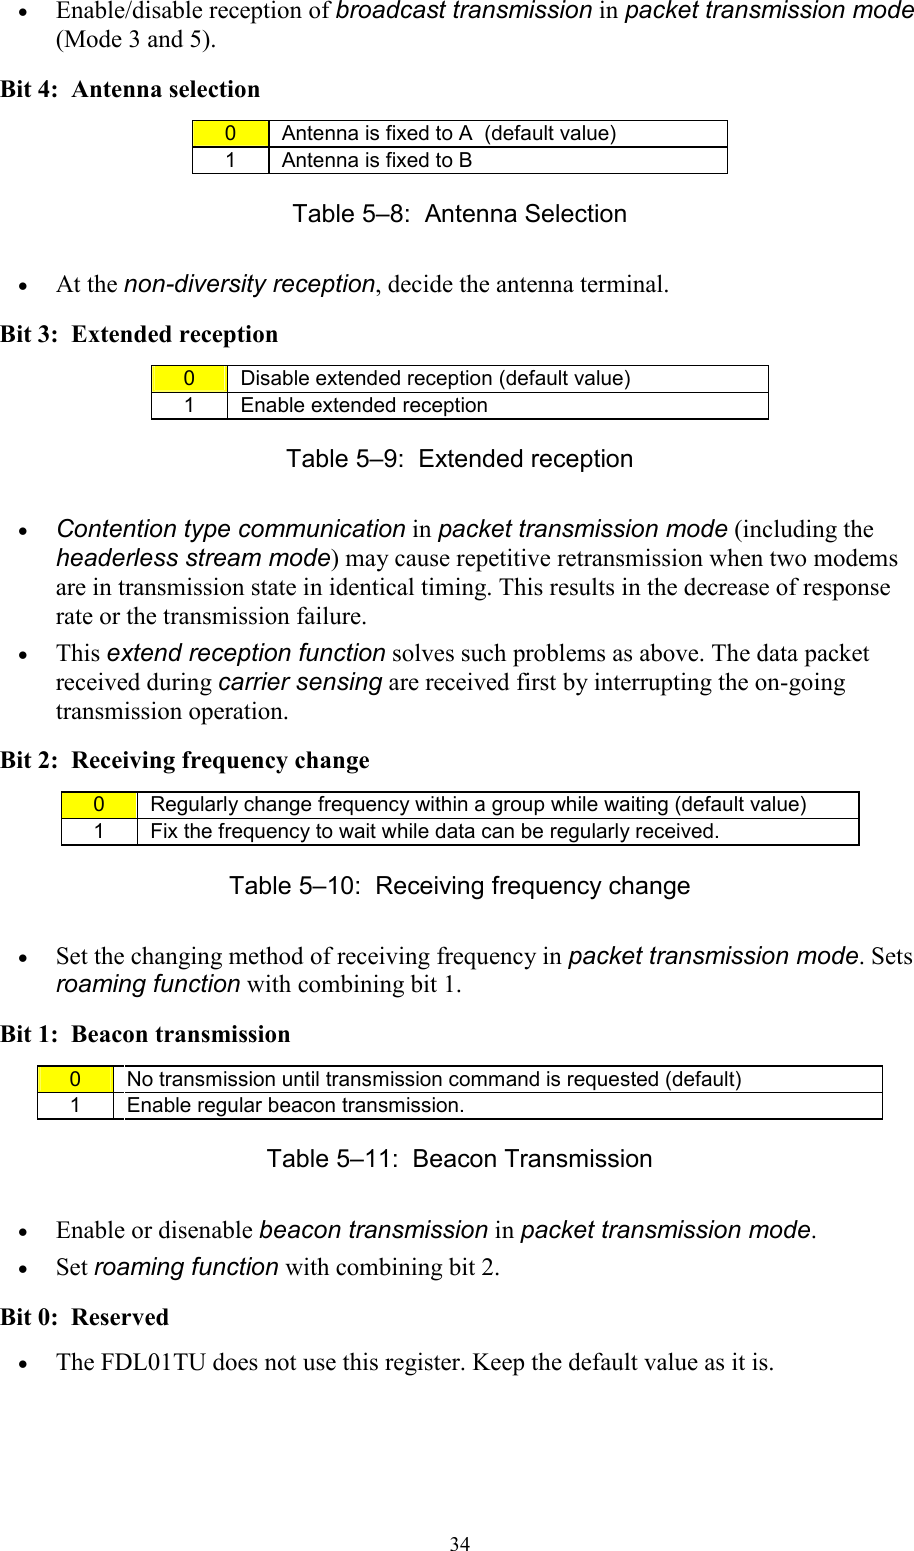   34• Enable/disable reception of broadcast transmission in packet transmission mode (Mode 3 and 5). Bit 4:  Antenna selection 0  Antenna is fixed to A  (default value) 1  Antenna is fixed to B Table 5–8:  Antenna Selection • At the non-diversity reception, decide the antenna terminal. Bit 3:  Extended reception 0  Disable extended reception (default value) 1  Enable extended reception  Table 5–9:  Extended reception • Contention type communication in packet transmission mode (including the headerless stream mode) may cause repetitive retransmission when two modems are in transmission state in identical timing. This results in the decrease of response rate or the transmission failure. • This extend reception function solves such problems as above. The data packet received during carrier sensing are received first by interrupting the on-going transmission operation.  Bit 2:  Receiving frequency change 0  Regularly change frequency within a group while waiting (default value) 1  Fix the frequency to wait while data can be regularly received. Table 5–10:  Receiving frequency change  • Set the changing method of receiving frequency in packet transmission mode. Sets roaming function with combining bit 1. Bit 1:  Beacon transmission 0  No transmission until transmission command is requested (default) 1  Enable regular beacon transmission. Table 5–11:  Beacon Transmission • Enable or disenable beacon transmission in packet transmission mode. • Set roaming function with combining bit 2. Bit 0:  Reserved • The FDL01TU does not use this register. Keep the default value as it is. 